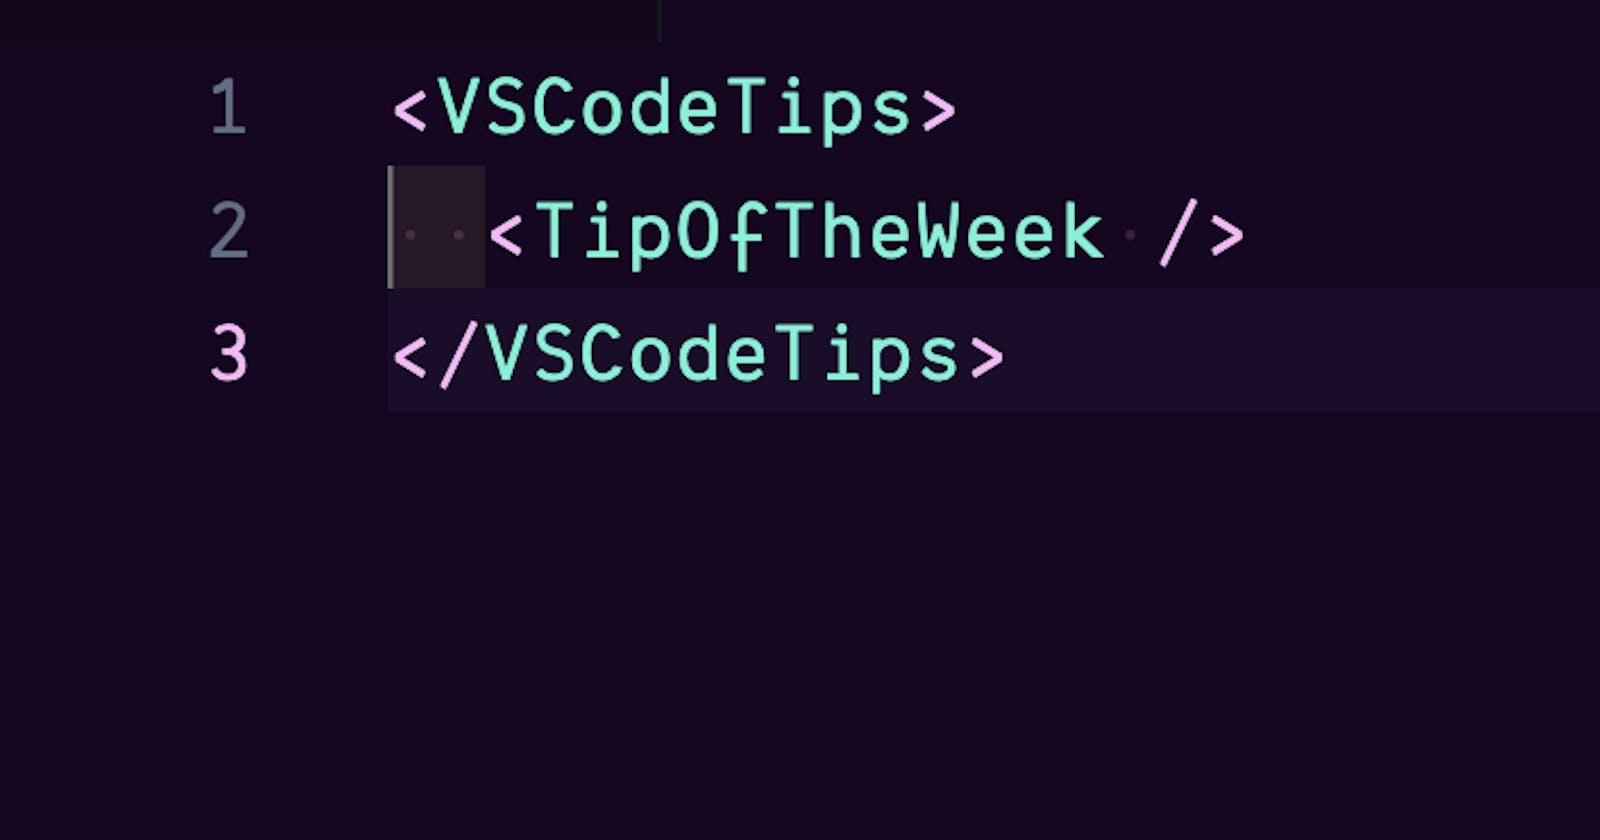 VS Code Tip of the Week: Drag & Drop Images and Links into Markdown Files